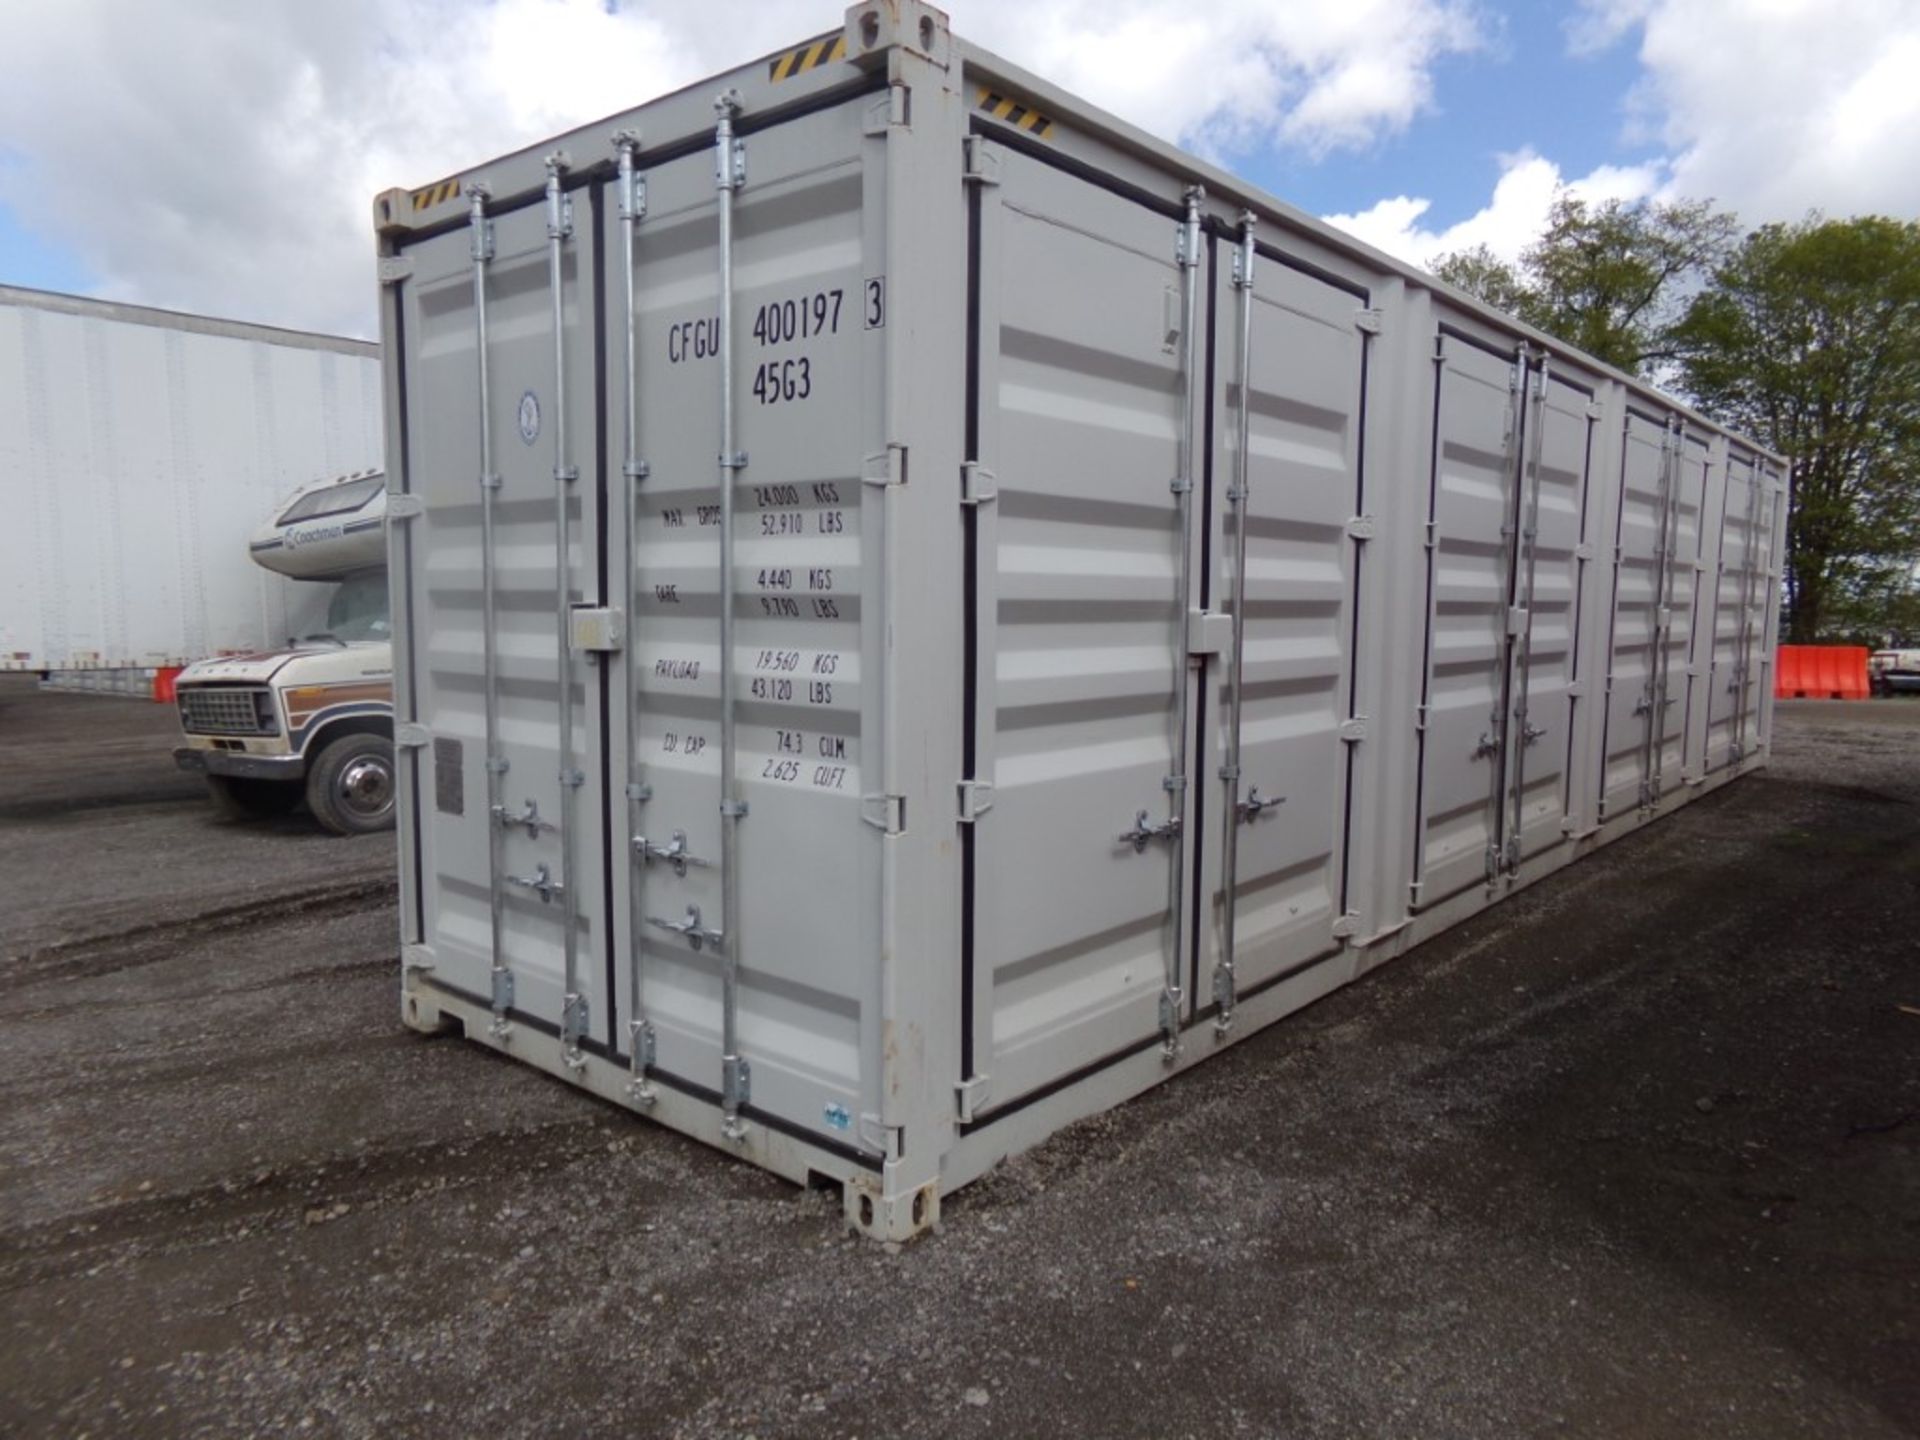 New 40' Container wirh (4) Side Access Doors and Barn Doors on 1 End, Cont. # CFGU4001973